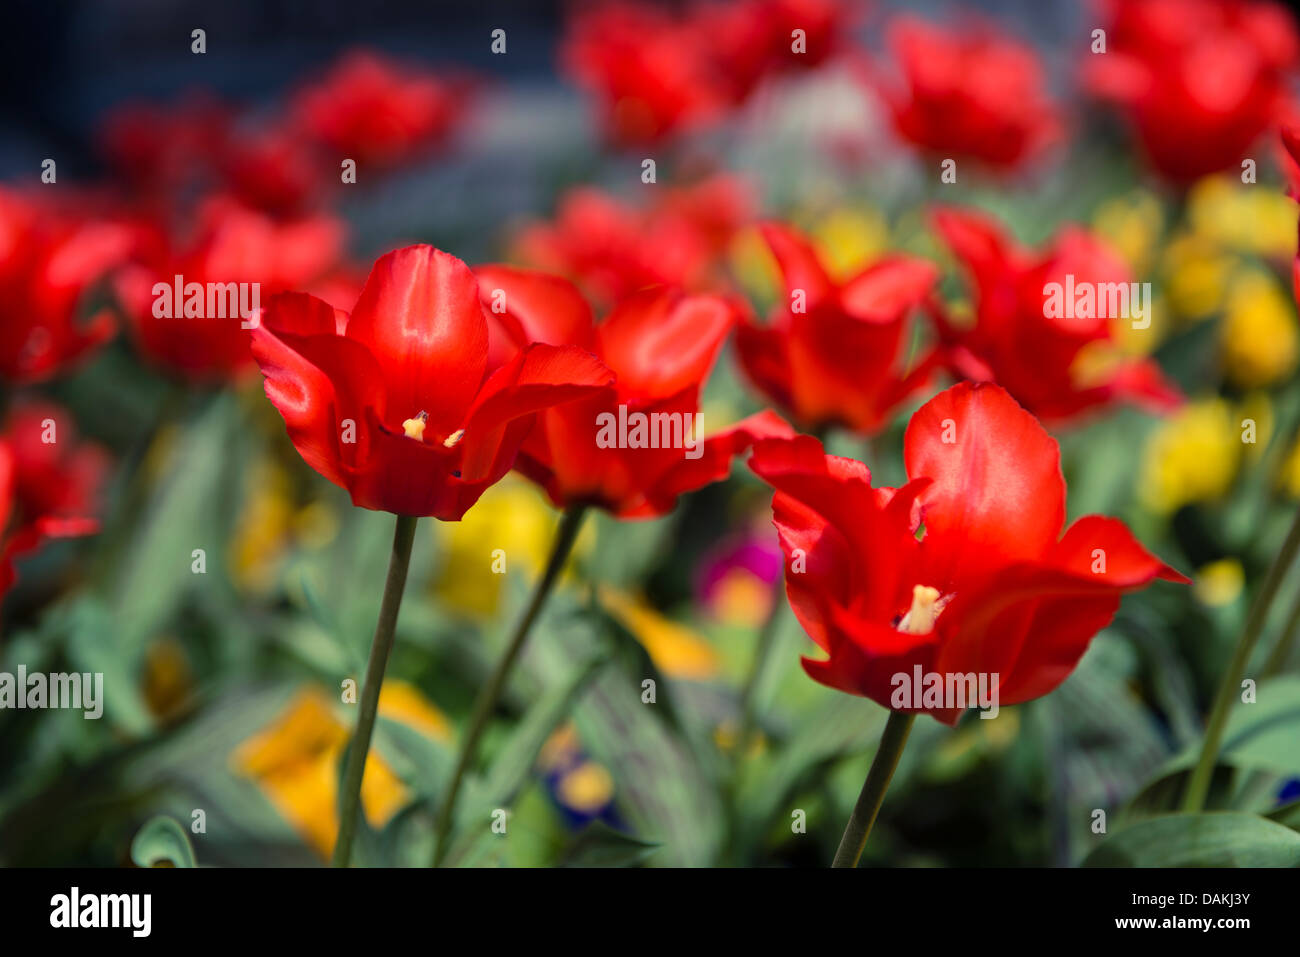 Red tulips in a flower bed in Stratford-Upon-Avon, United Kingdom Stock Photo